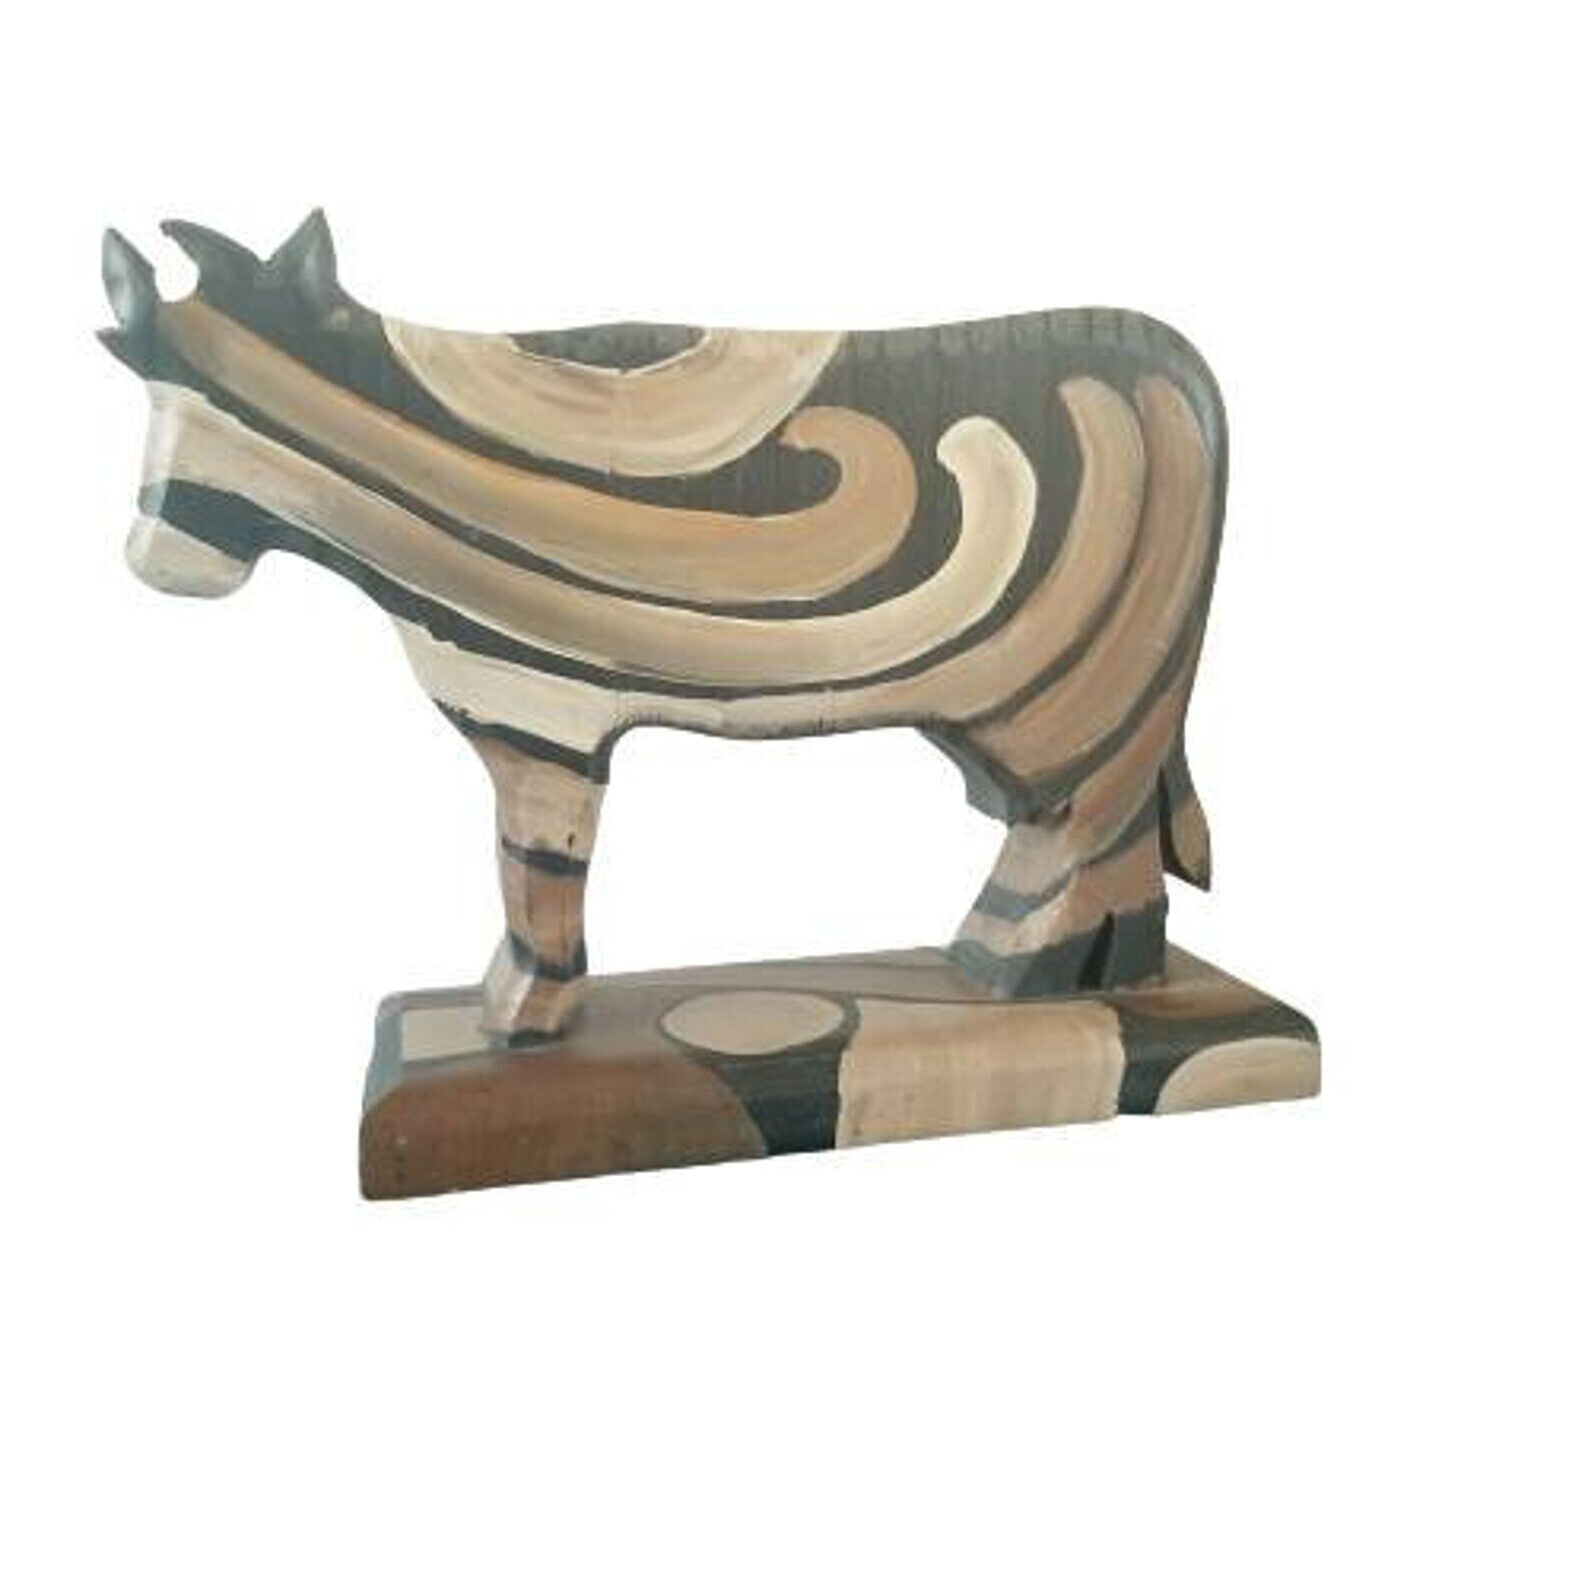 Vintage Hand Painted Carved Wood Cow Figurine, Wooden Home Decor